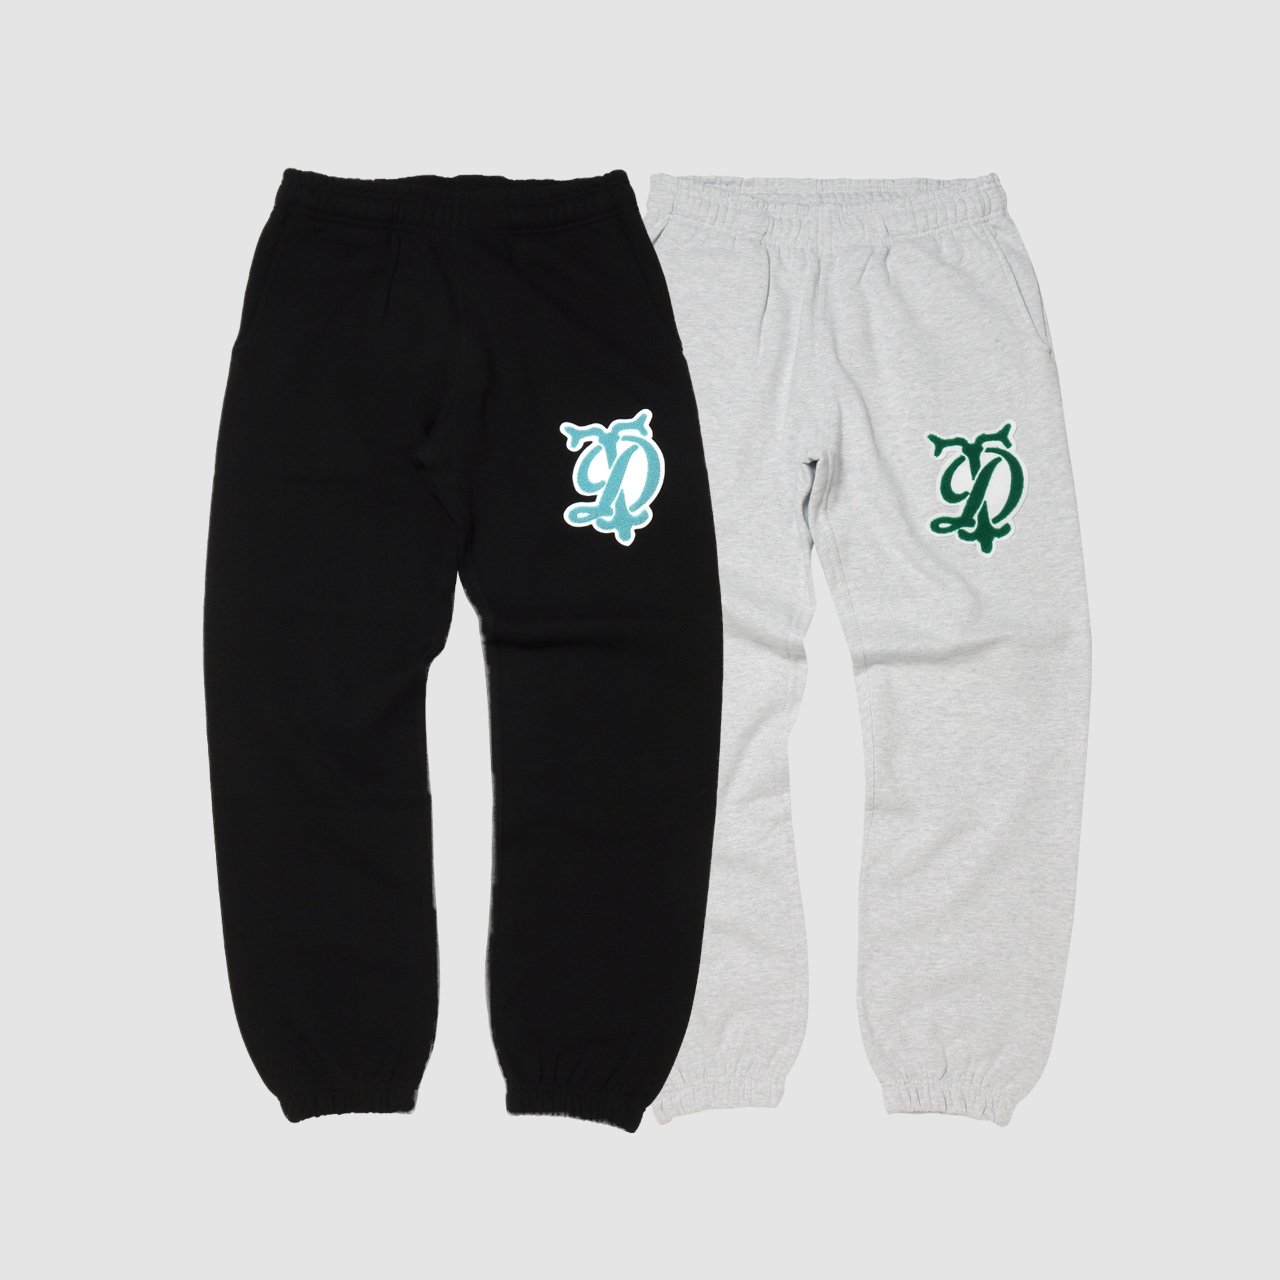 <img class='new_mark_img1' src='https://img.shop-pro.jp/img/new/icons20.gif' style='border:none;display:inline;margin:0px;padding:0px;width:auto;' />DT Vintage Logo Sweat Pants